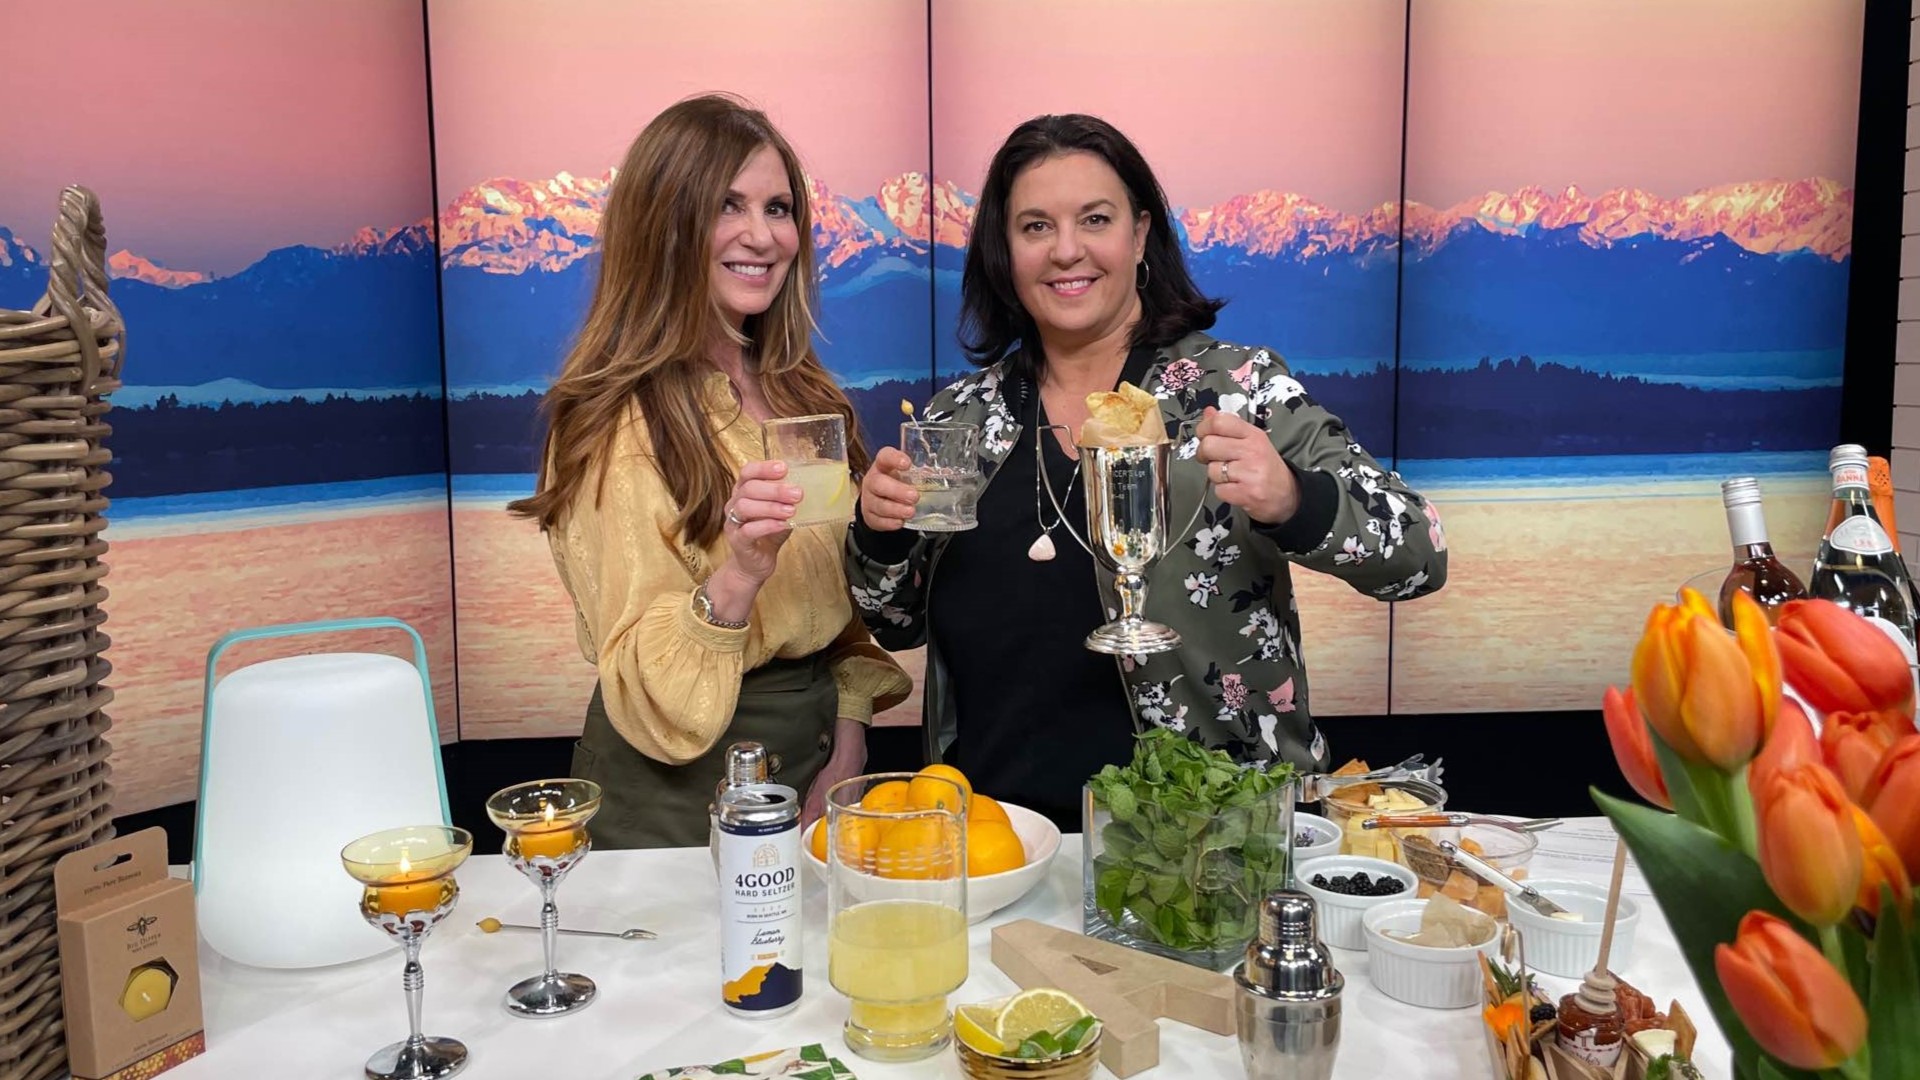 425 Magazine contributor Monica Hart says with a little advanced prep and a go-to basket of essentials, you can elevate any backyard party. #newdaynw